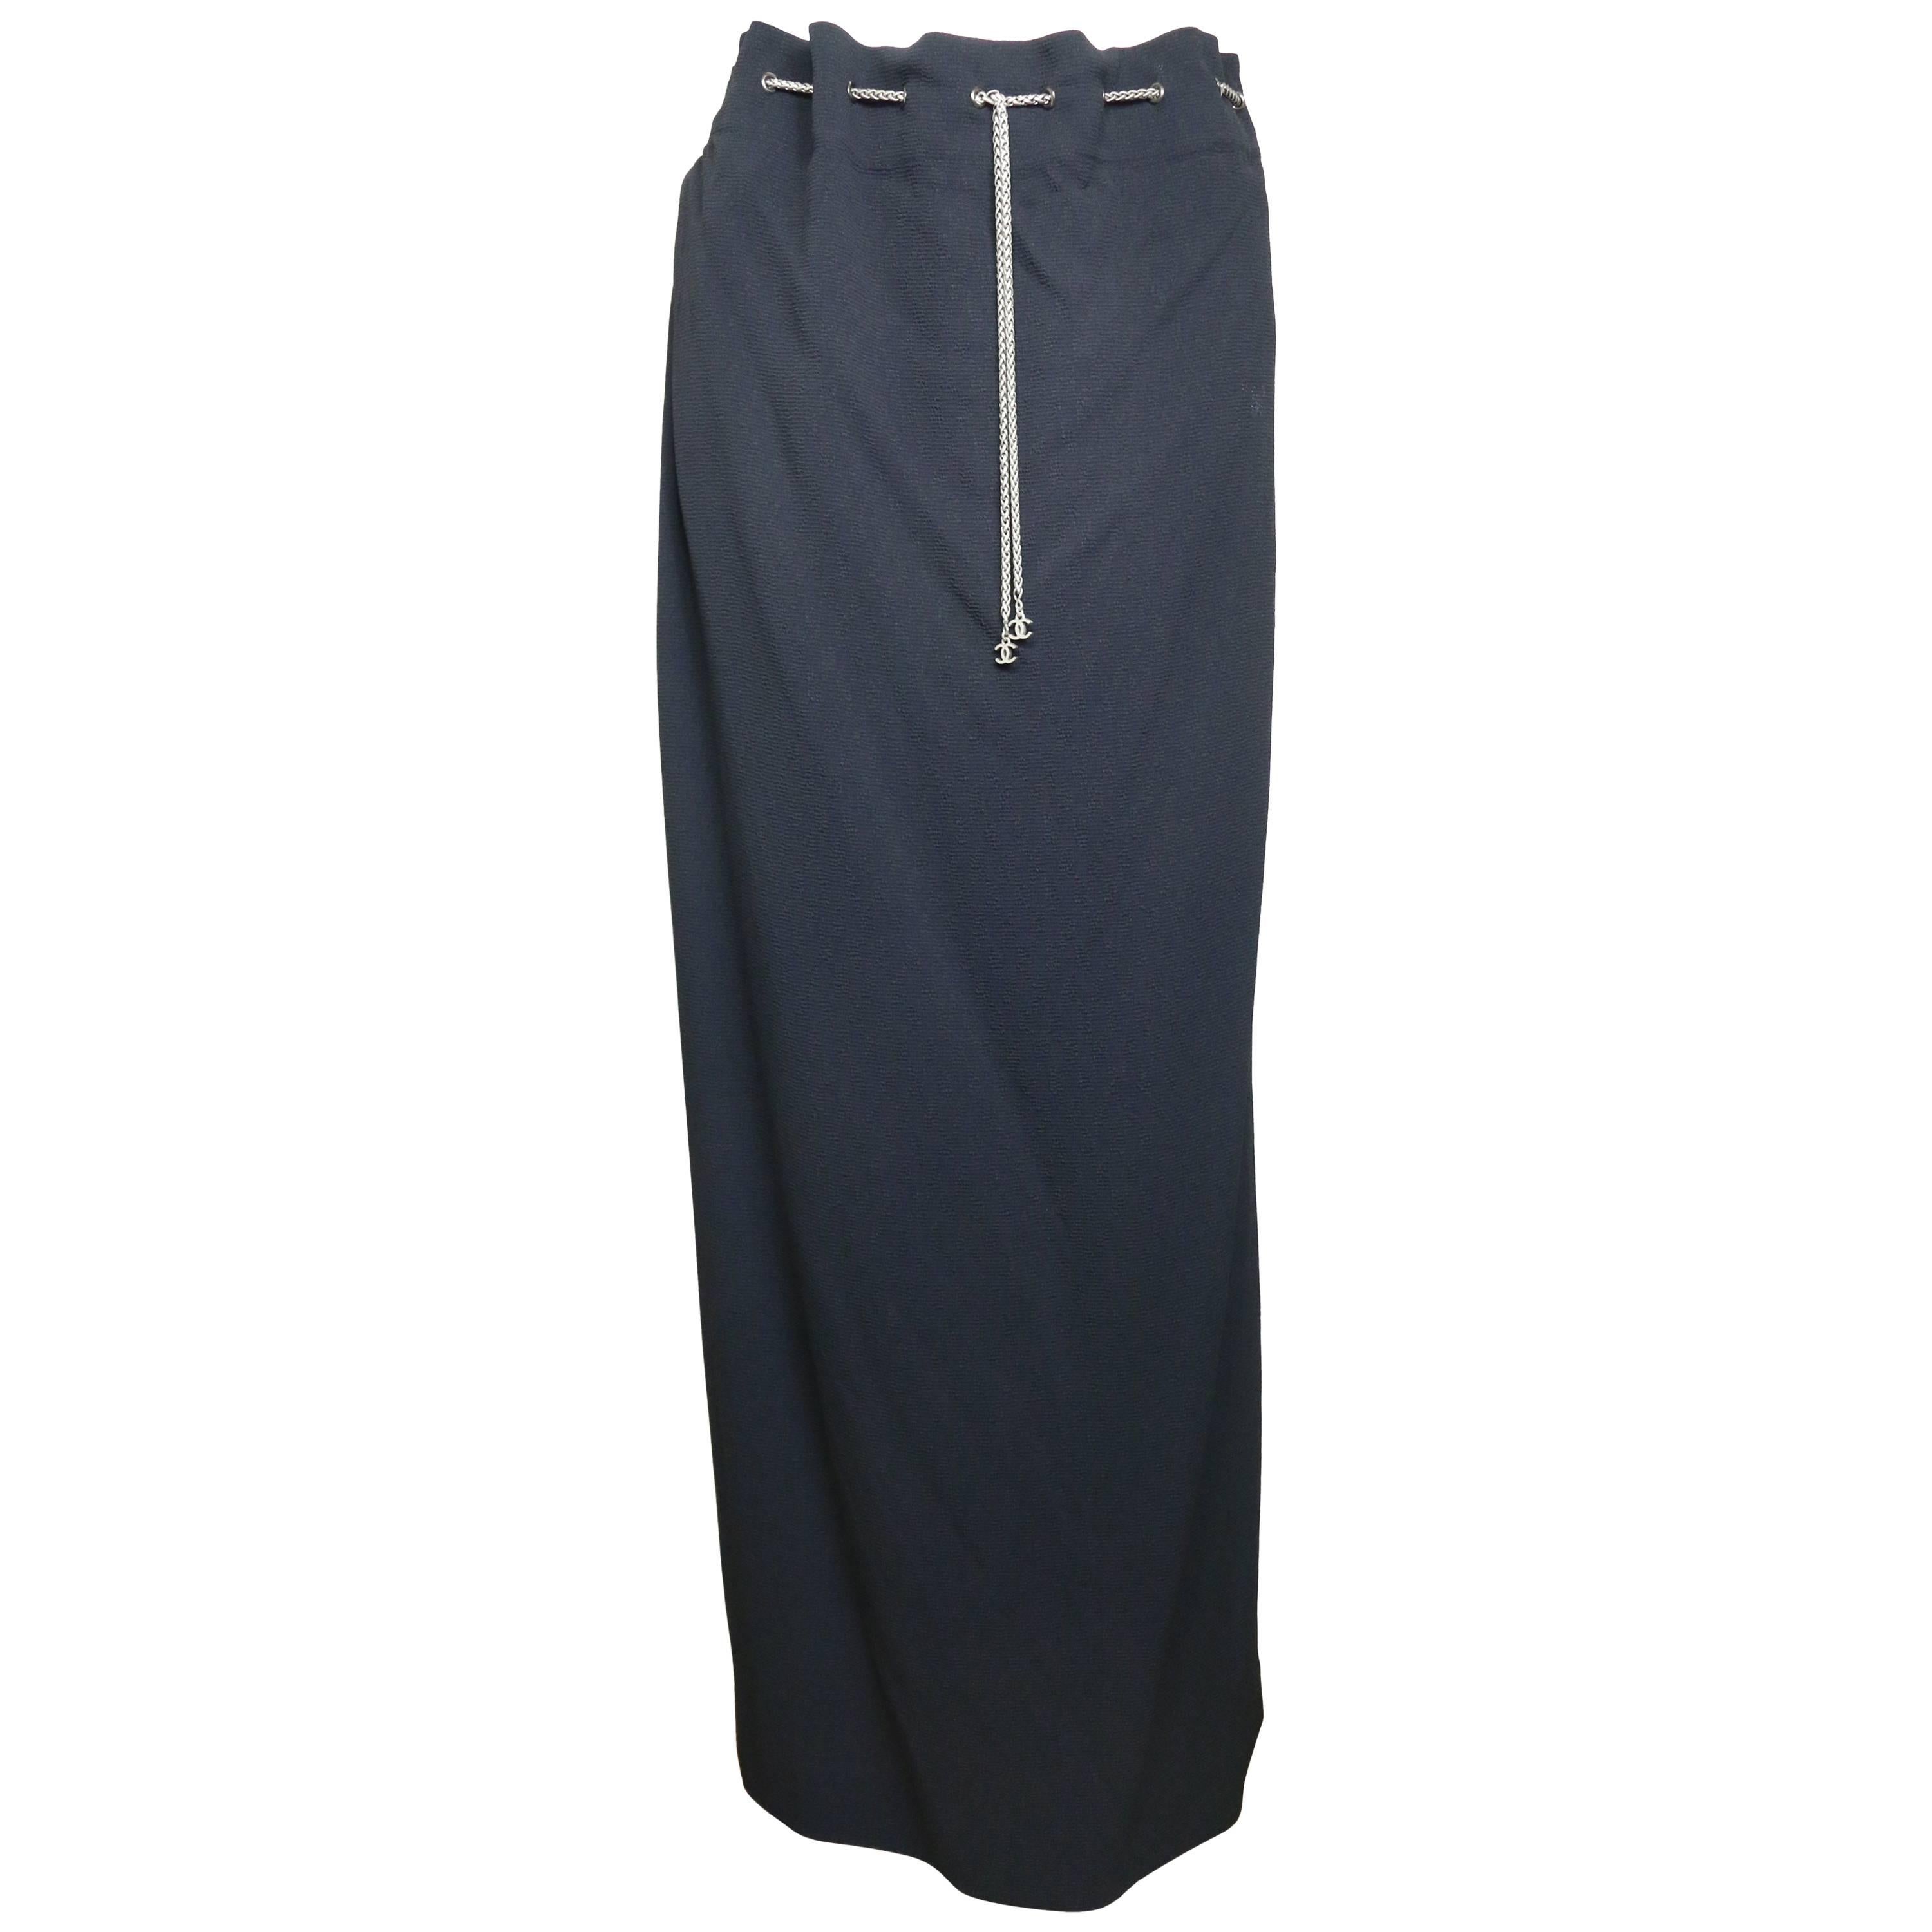 Chanel Black Long Skirt with Silver Chain Waist For Sale